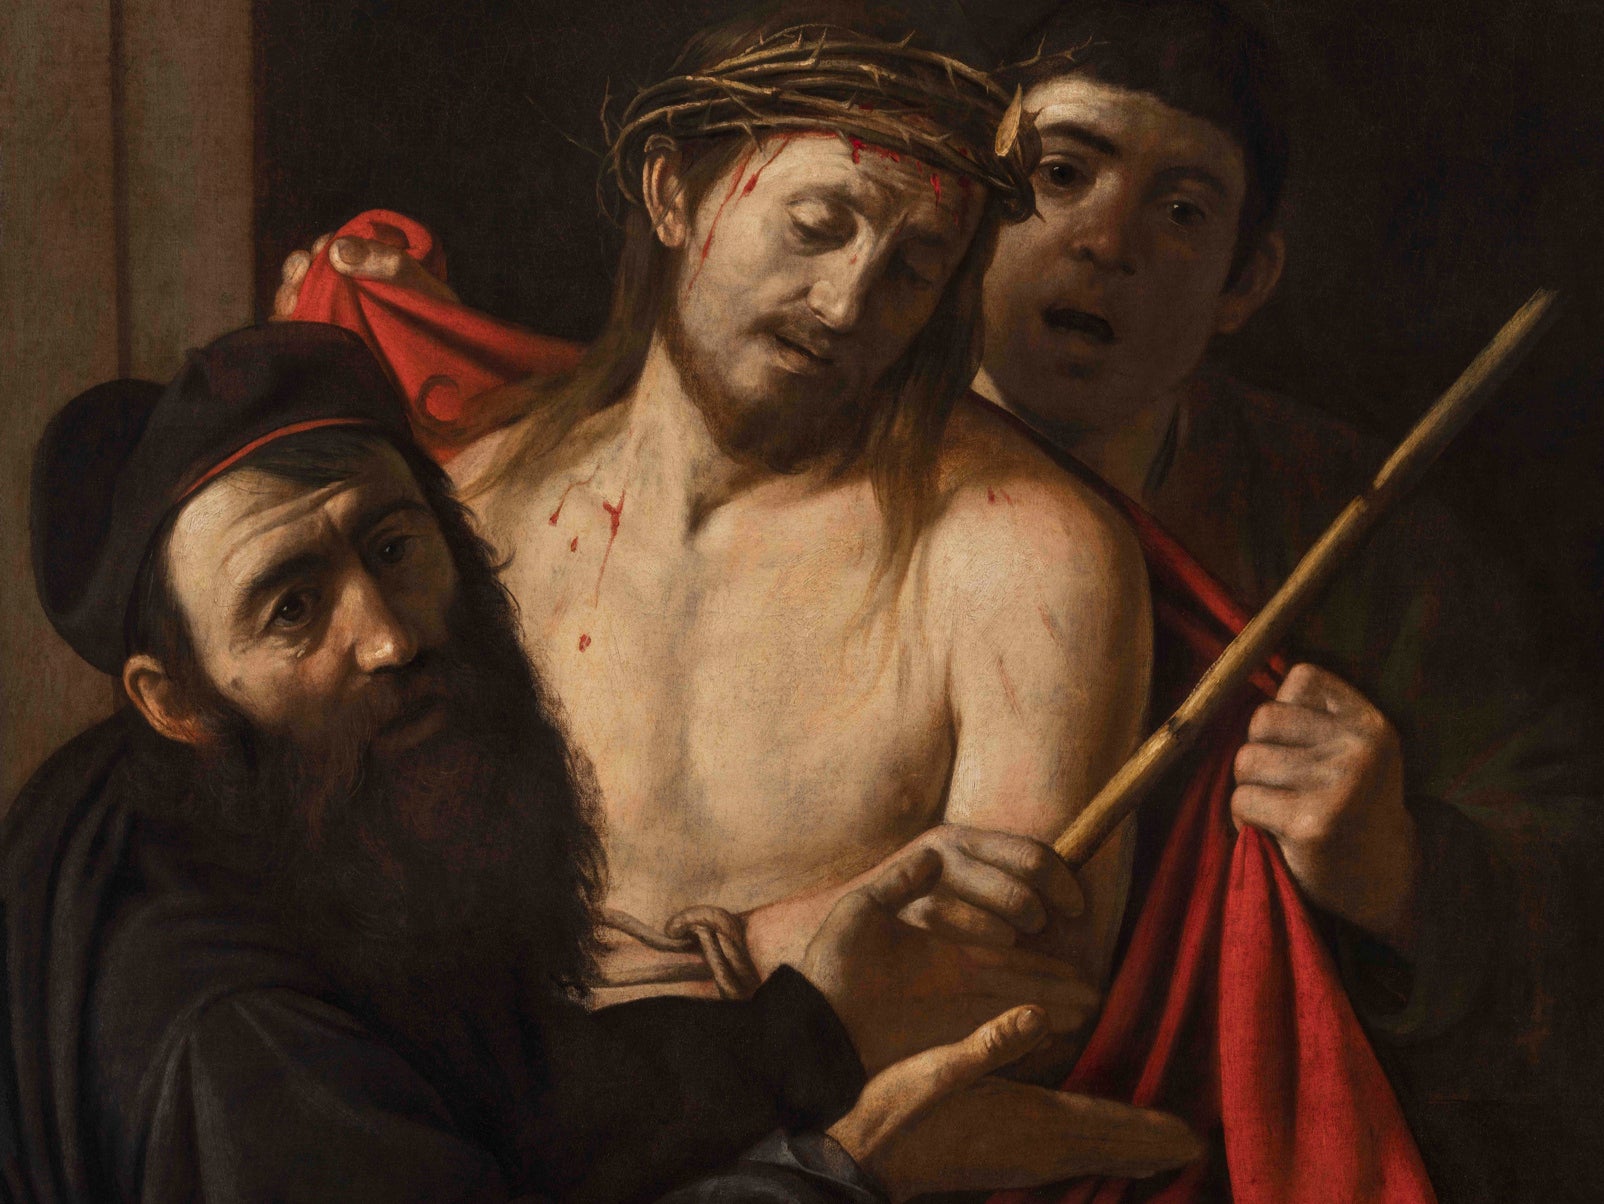 Detail of the painting now believed to be Caravaggio’s ‘Ecce Homo’